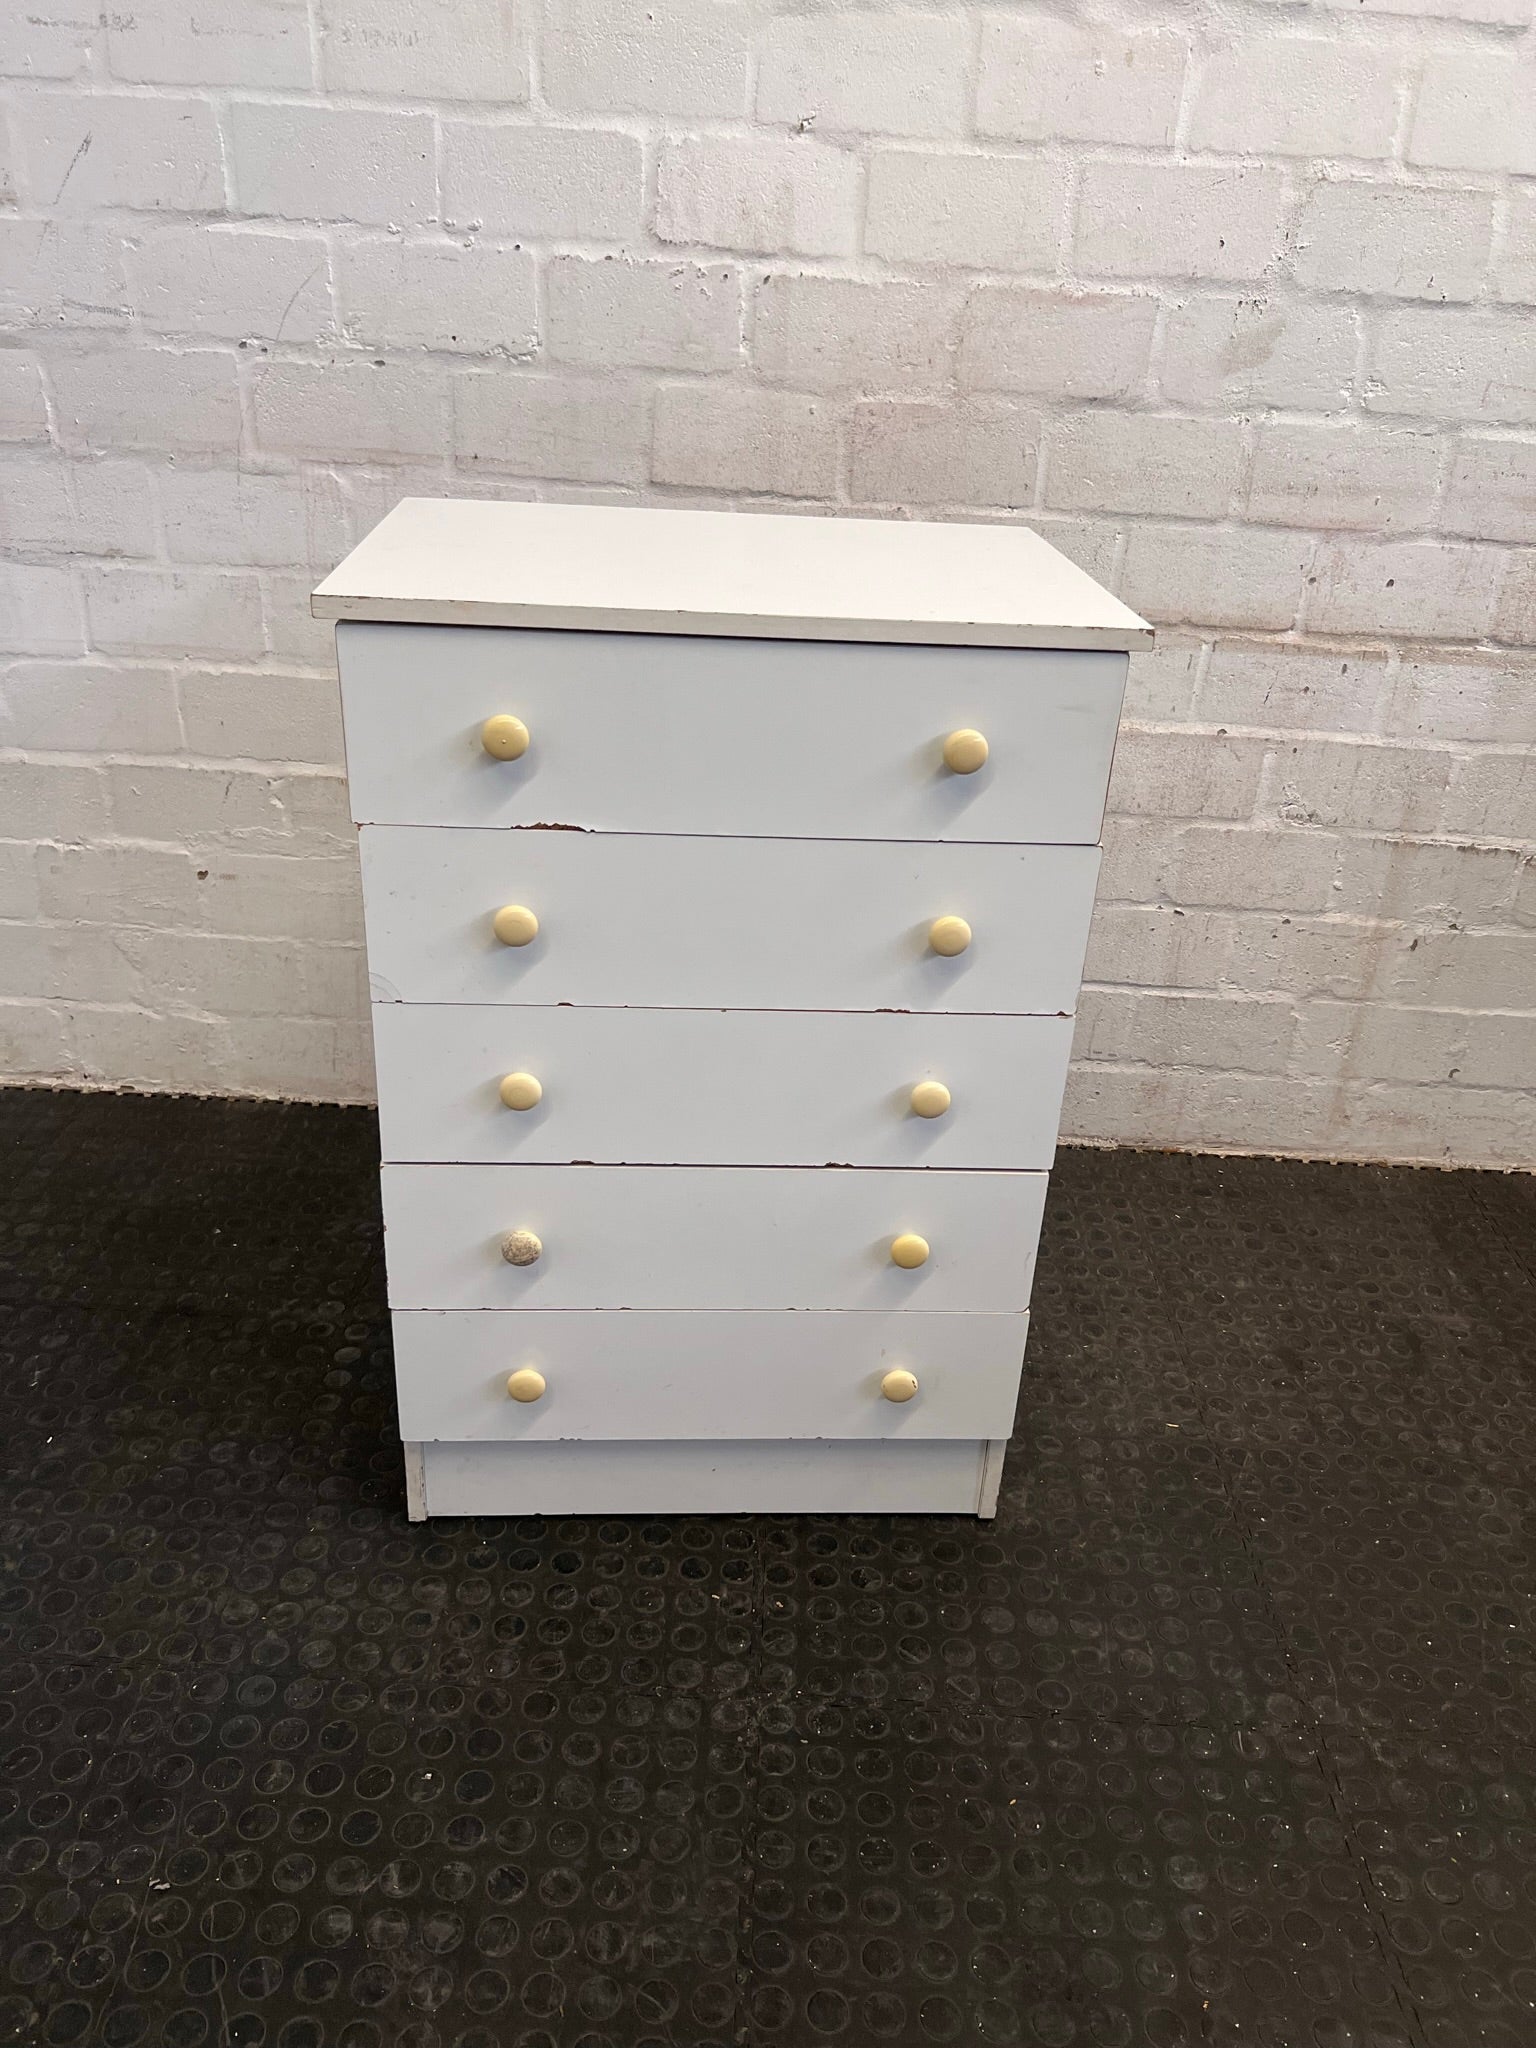 Chest of Drawers - REDUCED